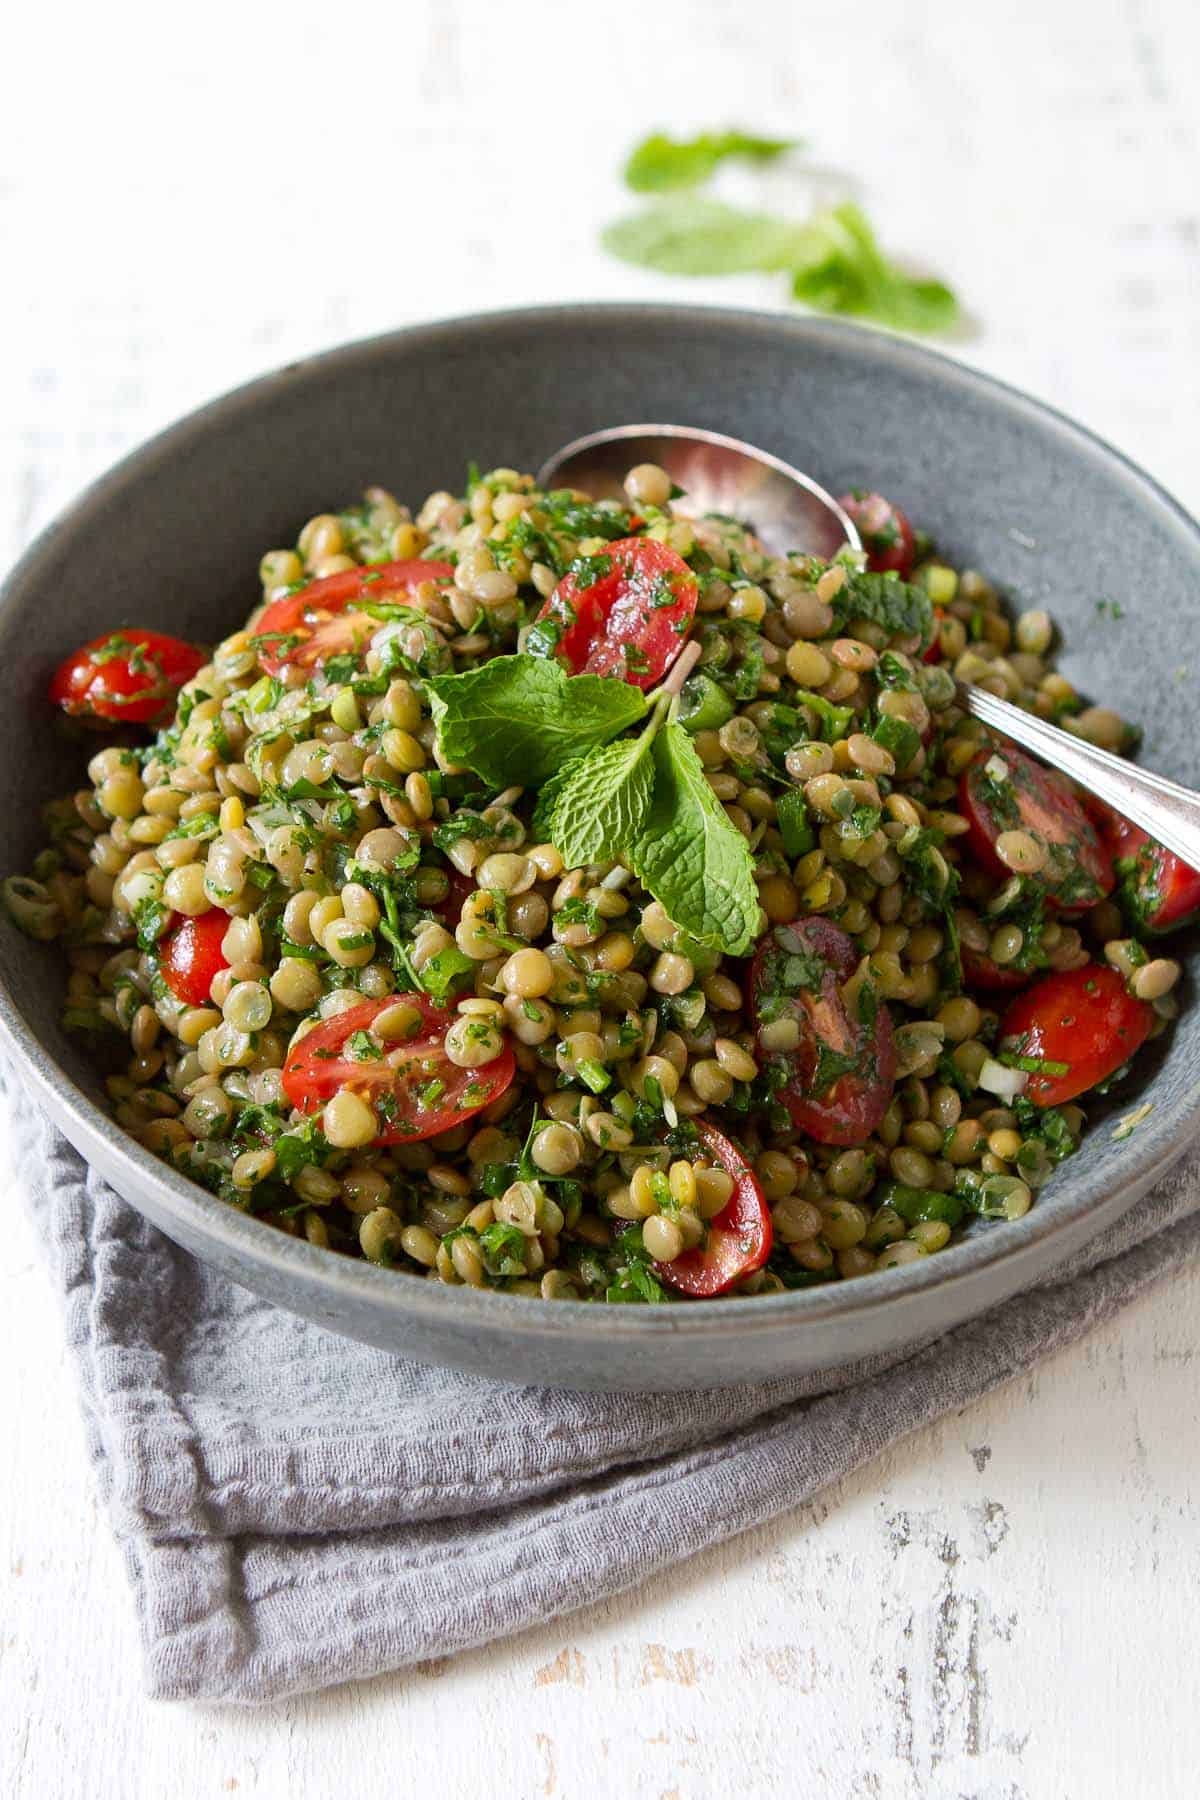 Lentil salad with tomatoes and herbs in a gray bowl.